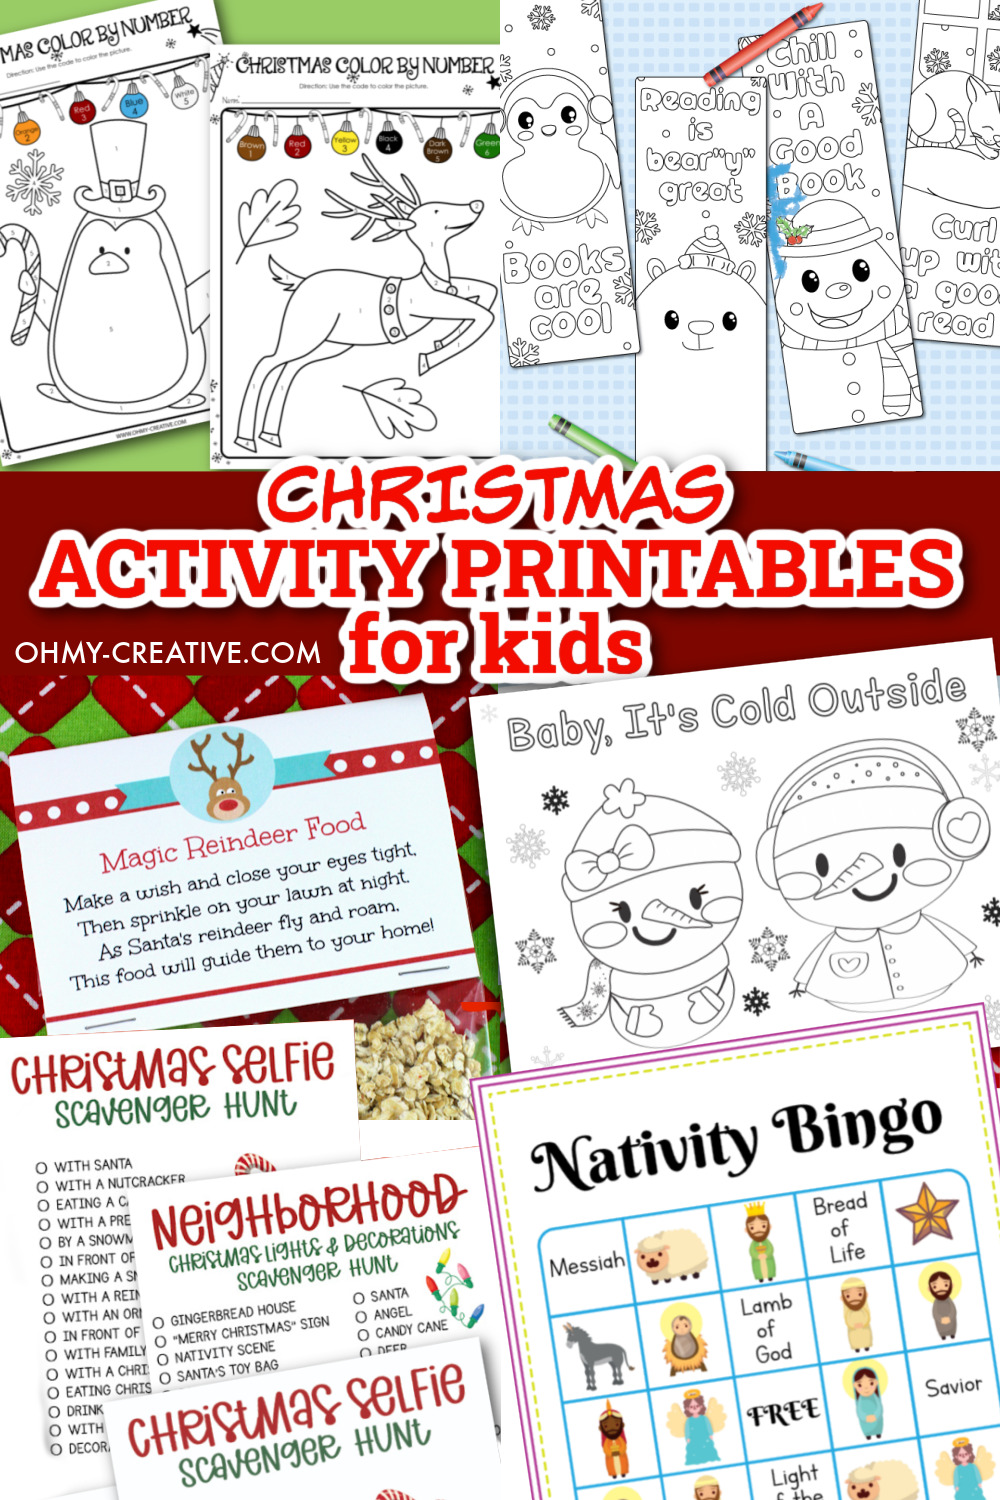 A collage of Christmas activity printables for kids.